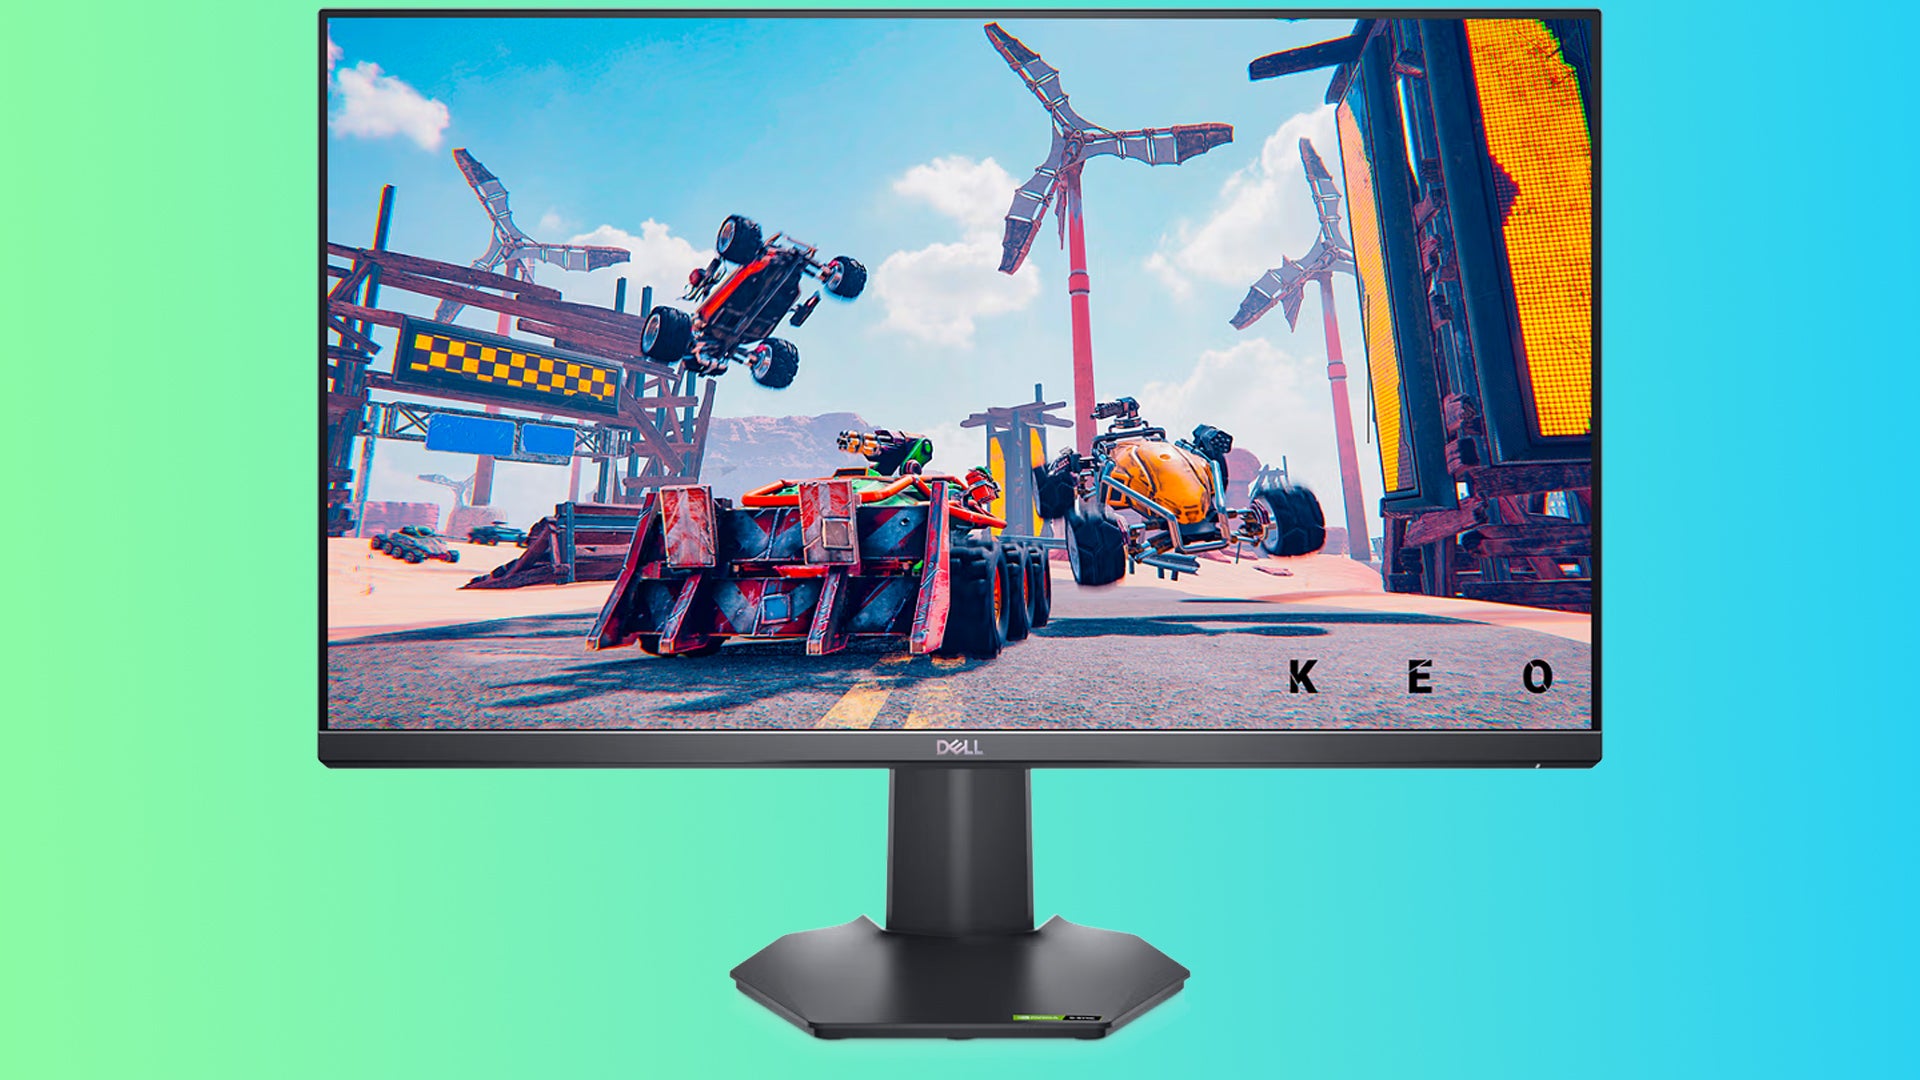 This great value 27-inch Dell monitor offers 165Hz gaming for just